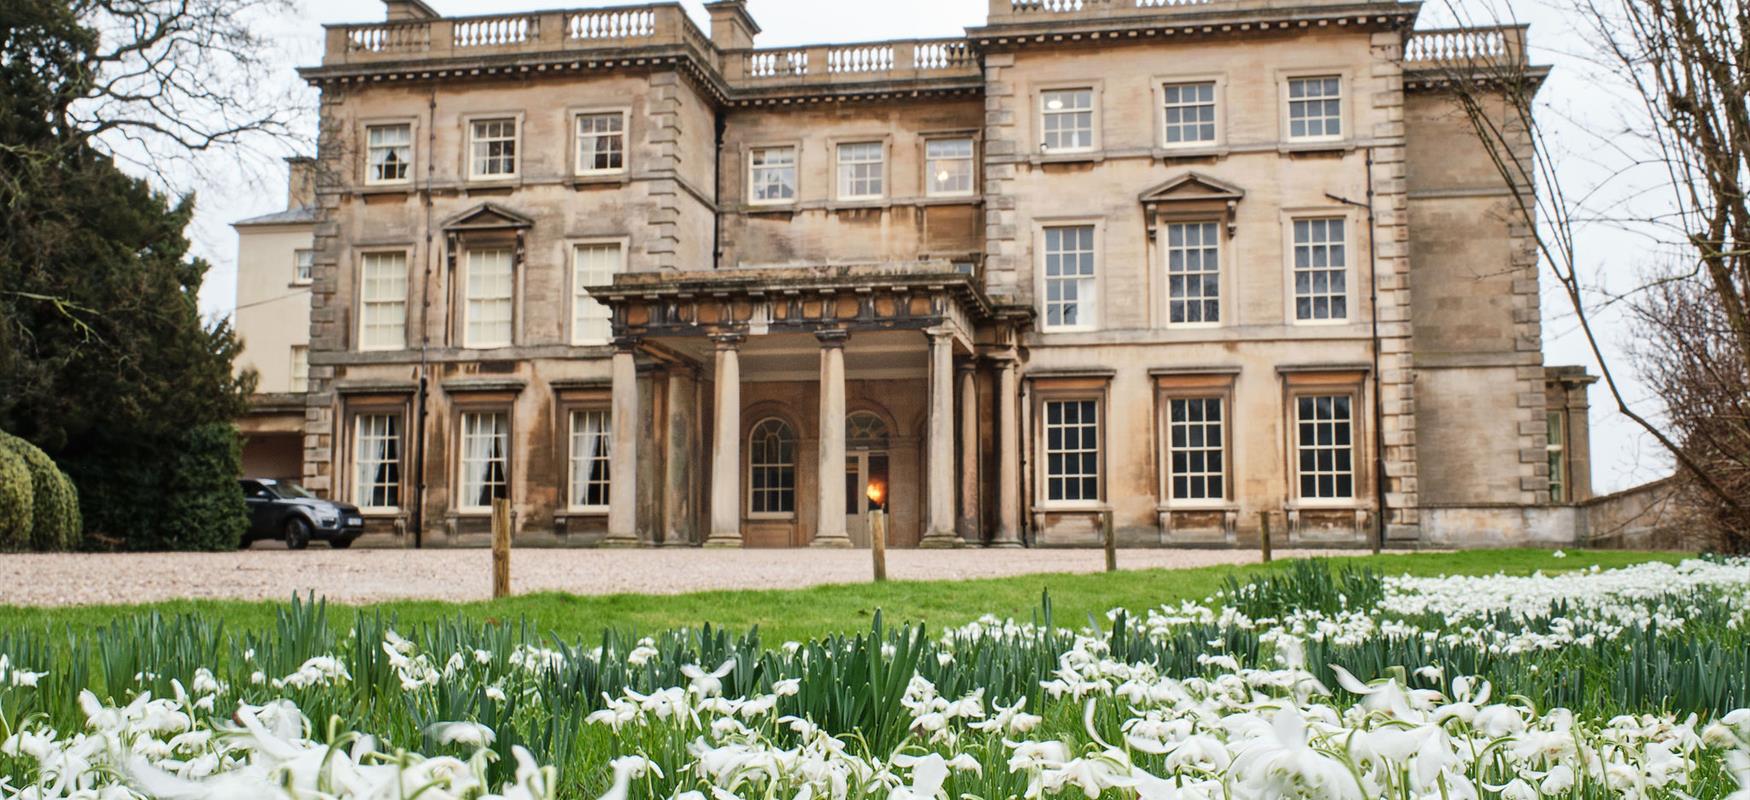 Prestwold Hall Front Exterior